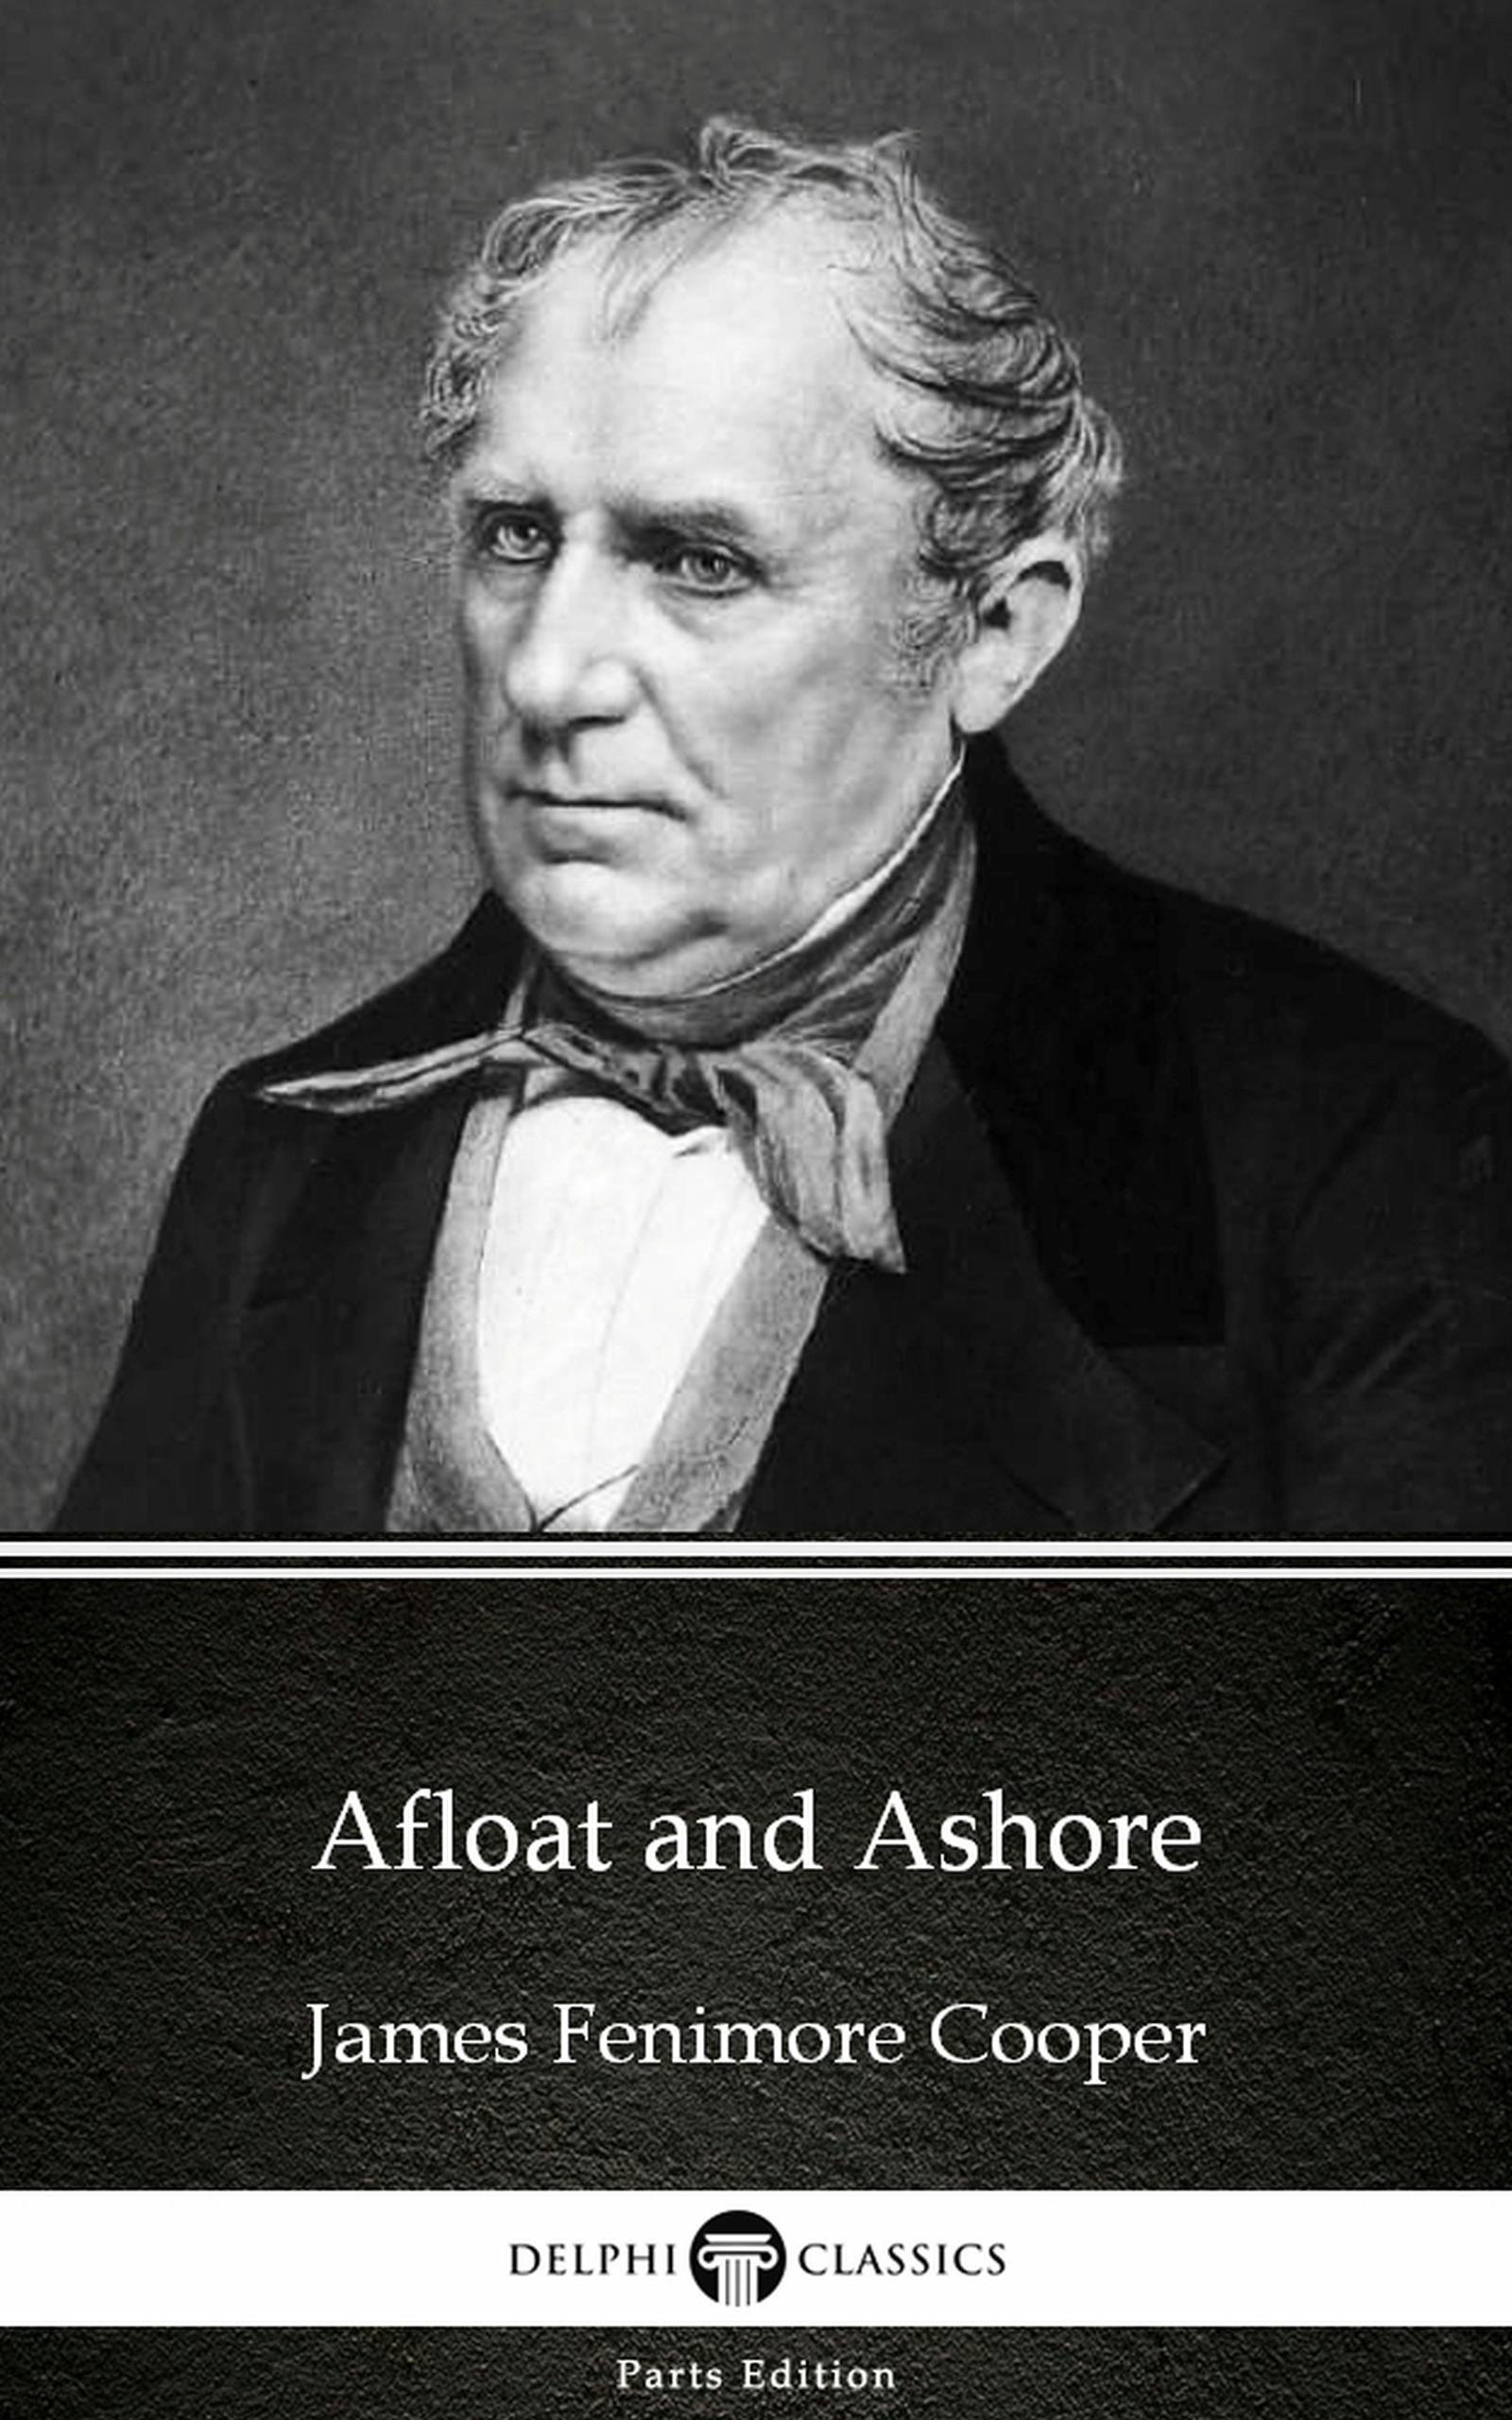 Afloat and Ashore by James Fenimore Cooper - Delphi Classics (Illustrated) - James Fenimore Cooper